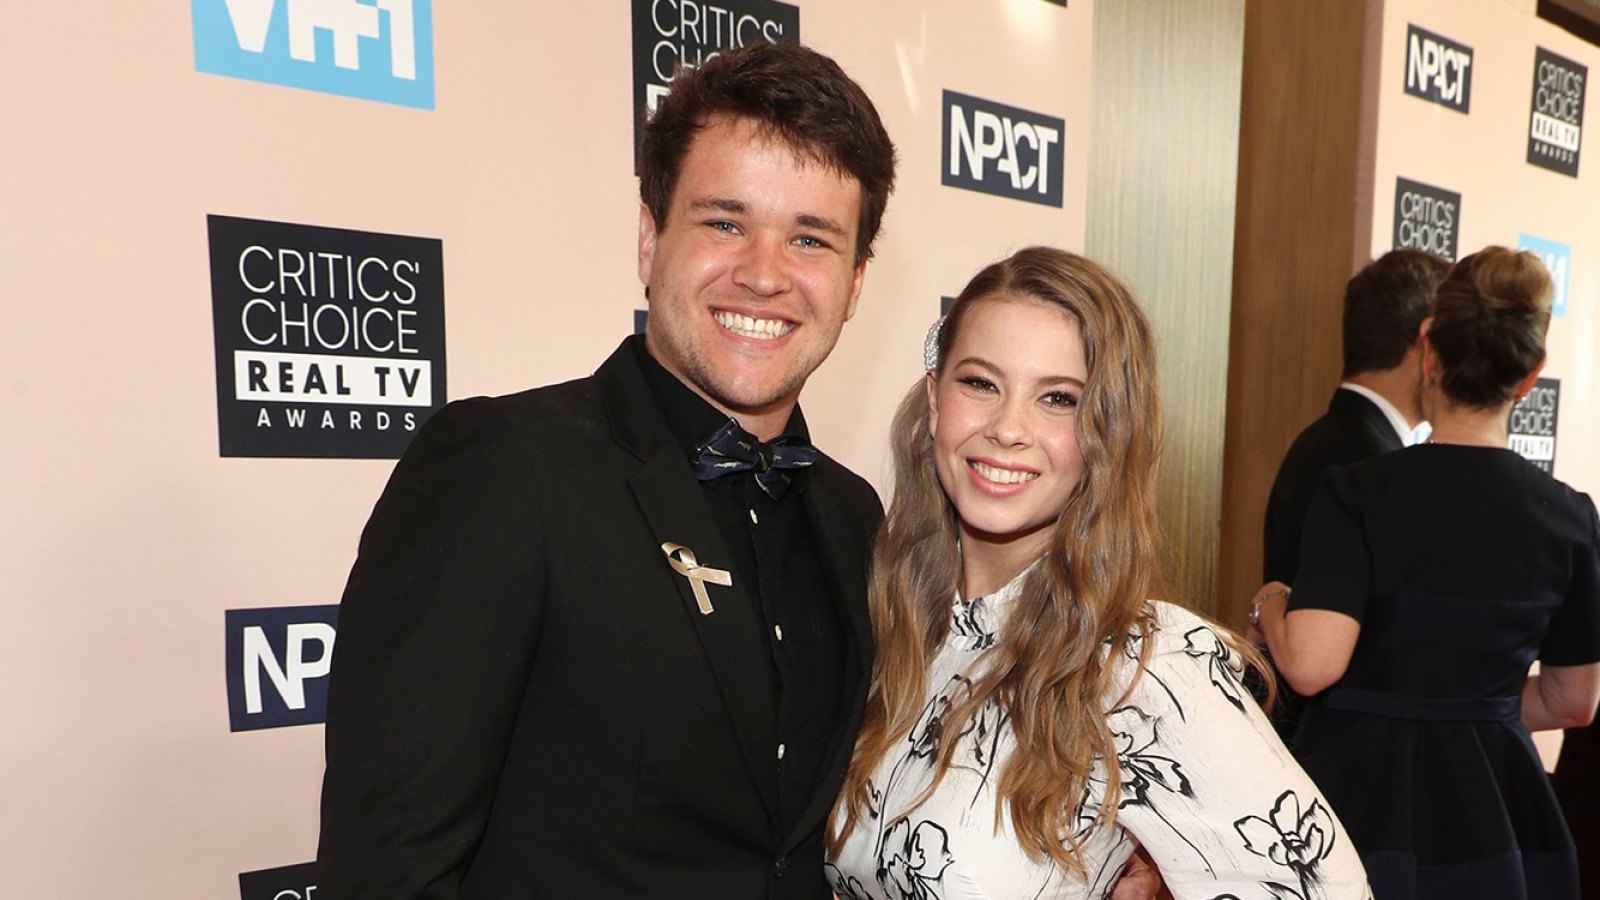 Bindi Irwin and Fiancé Chandler Powell Add a Puppy to Their Family